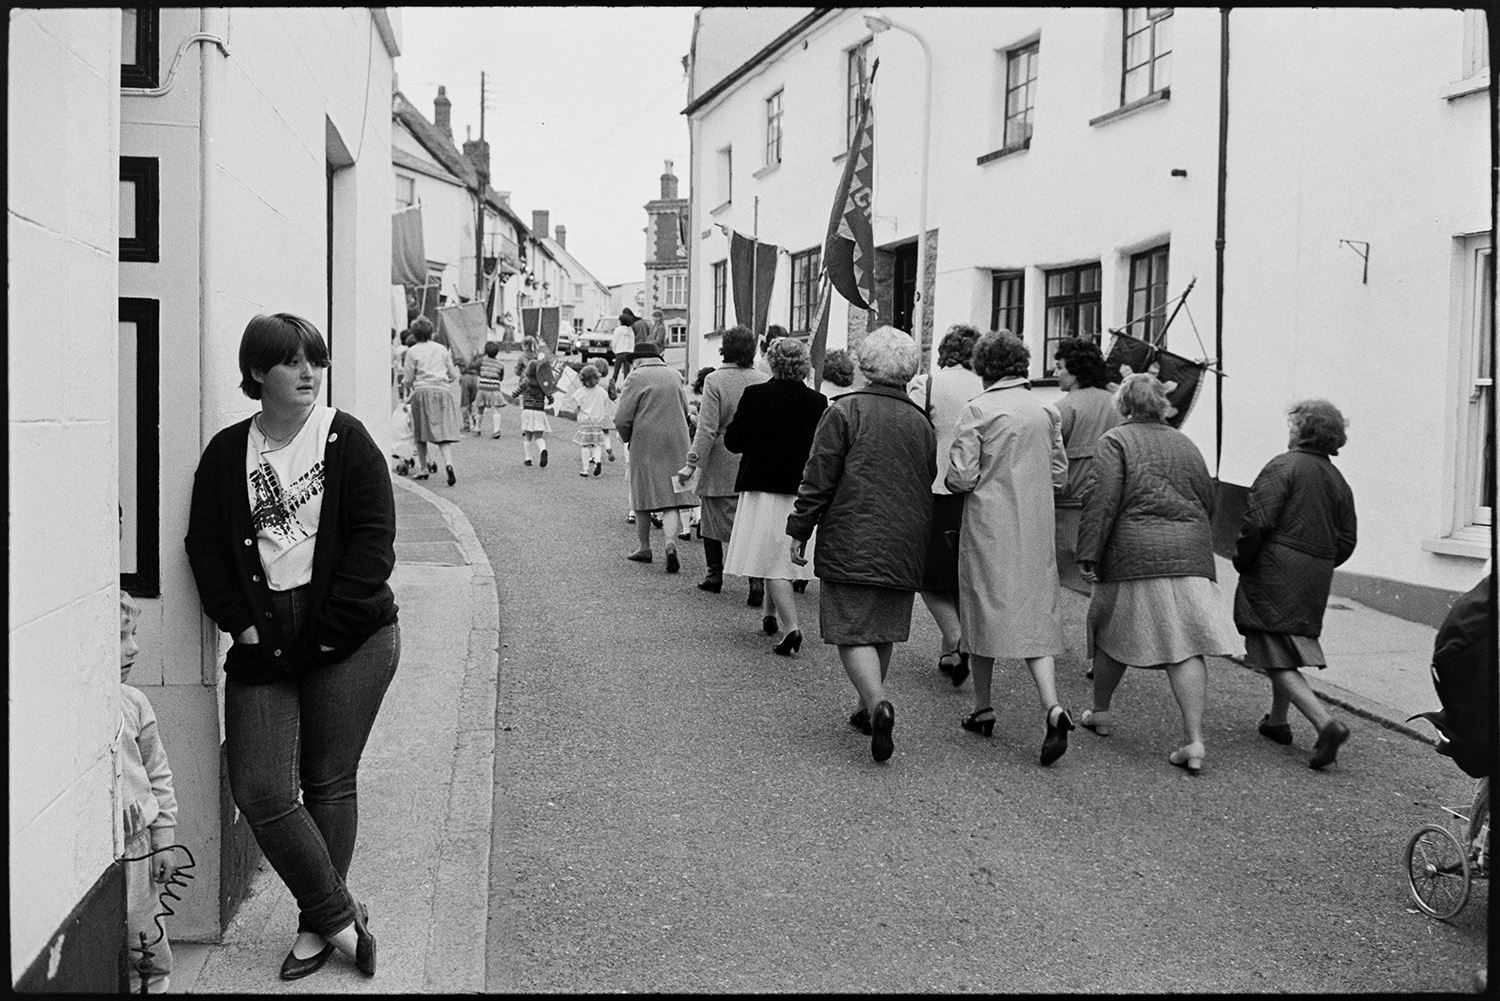 Church Sunday School Parade with banners and Silver Band marching behind garland.
[Women and children marching along a street in Hatherleigh in the Hatherleigh Church Sunday Schools Parade, with some of the women carrying banners. A woman and child are standing in front of a doorway in the foreground, watching the parade.]